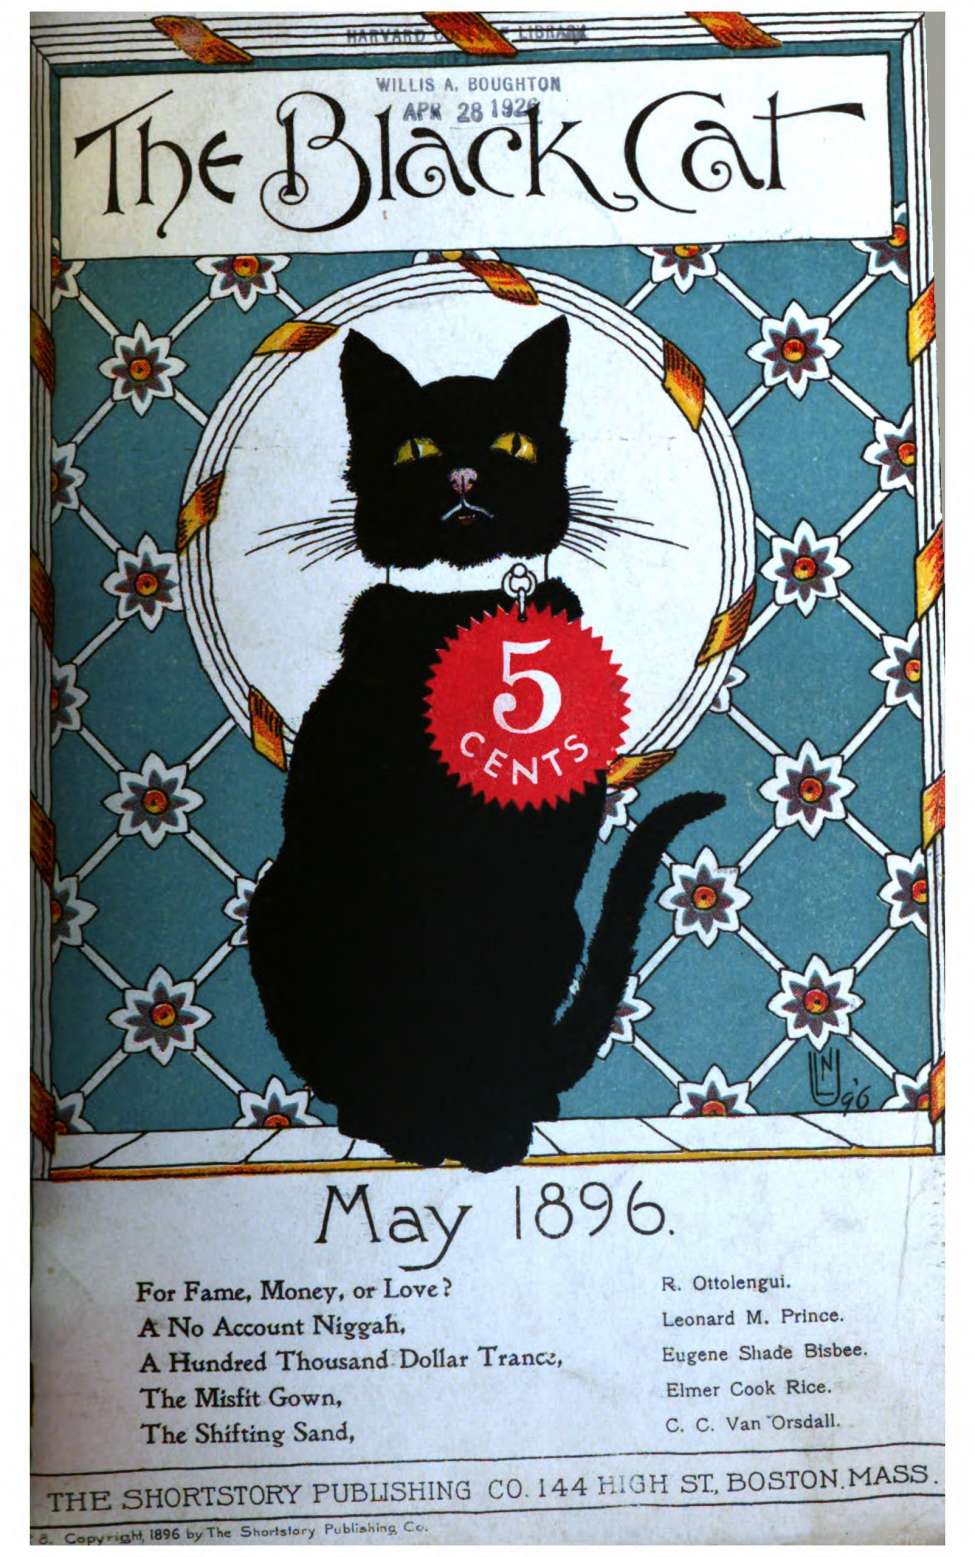 Book Cover For The Black Cat v1 8 - For Fame, Money, or Love? - R. Ottolengui